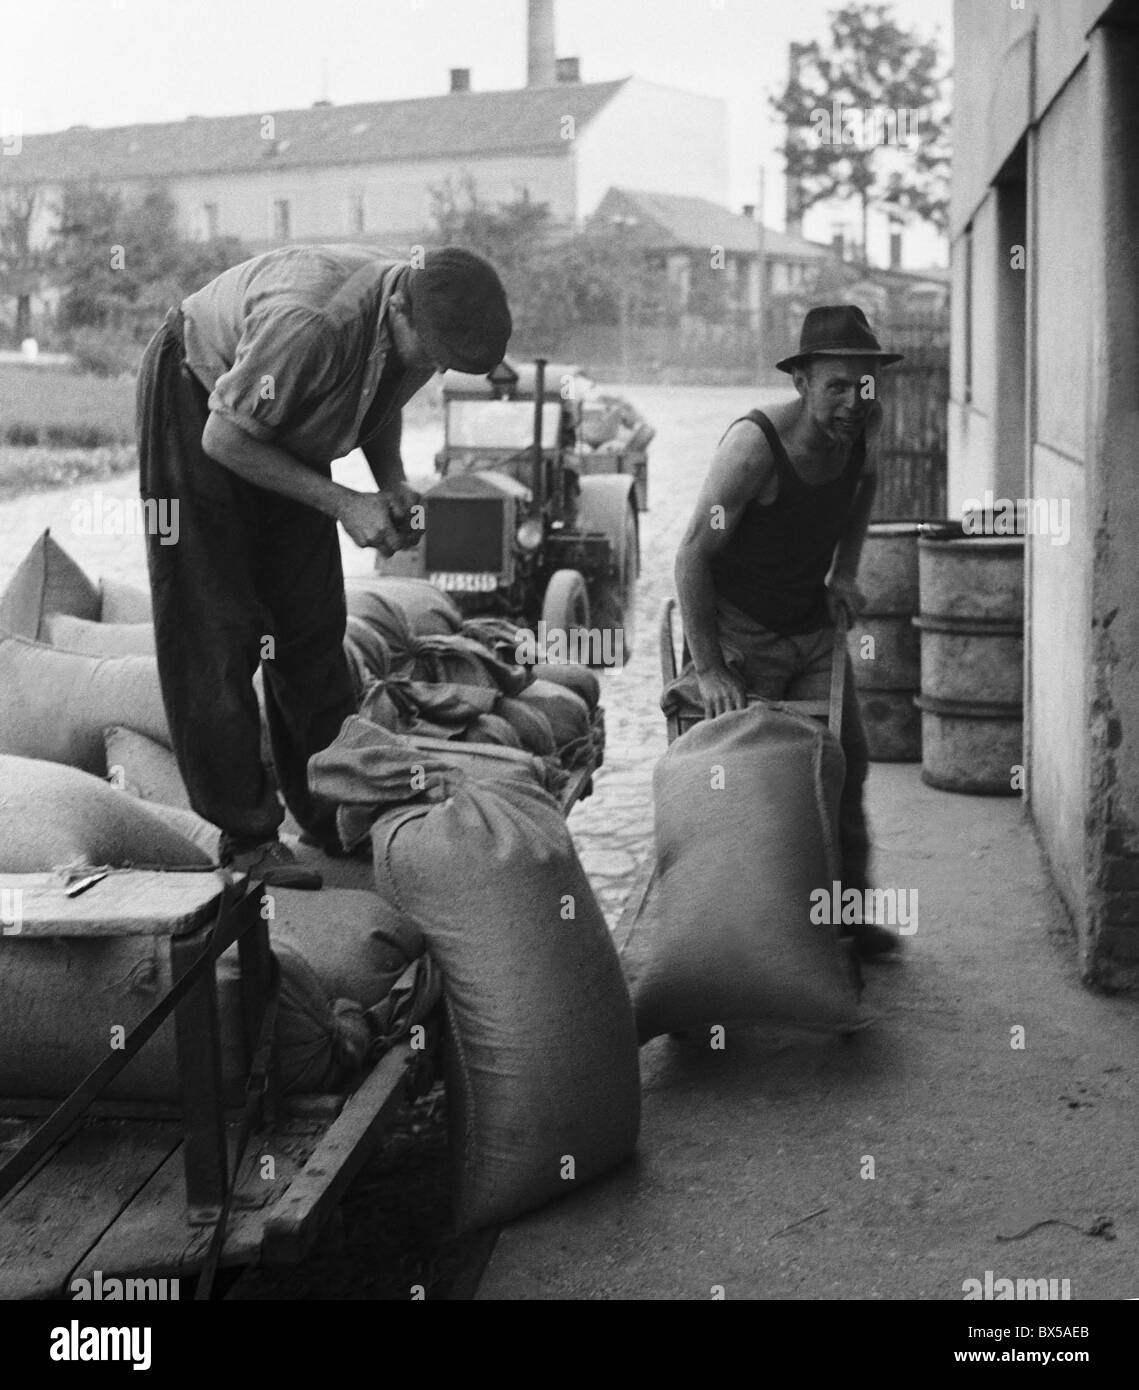 Czechoslovakia - Reporyje 1948. Harvested wheat is collected and stored in bags before being milled for flour. CTK Vintage Stock Photo